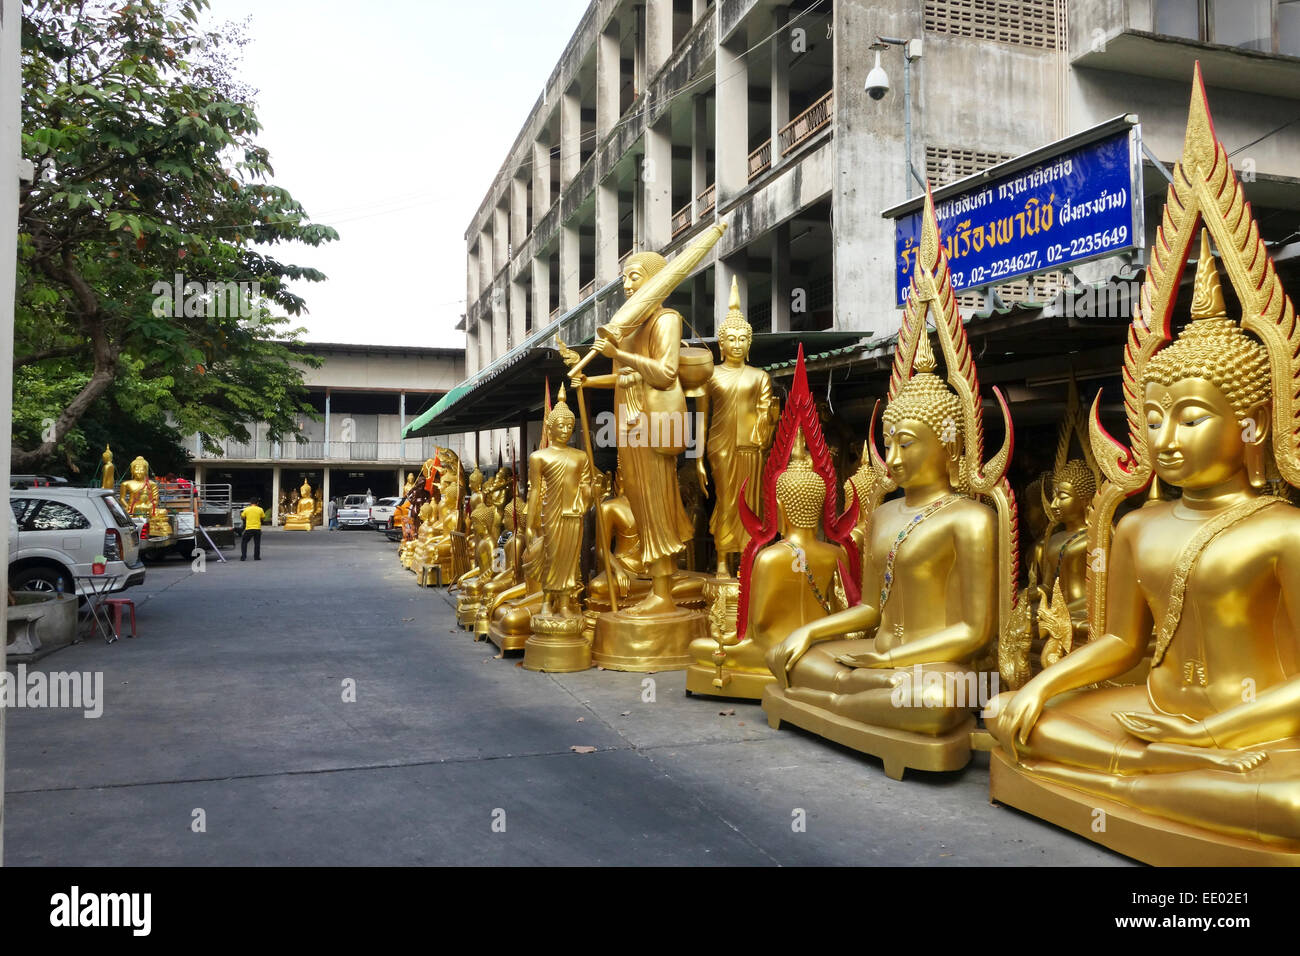 Buddha golden statues at manufactury on street in Bangkok, Thailand, Southeast Asia. Stock Photo